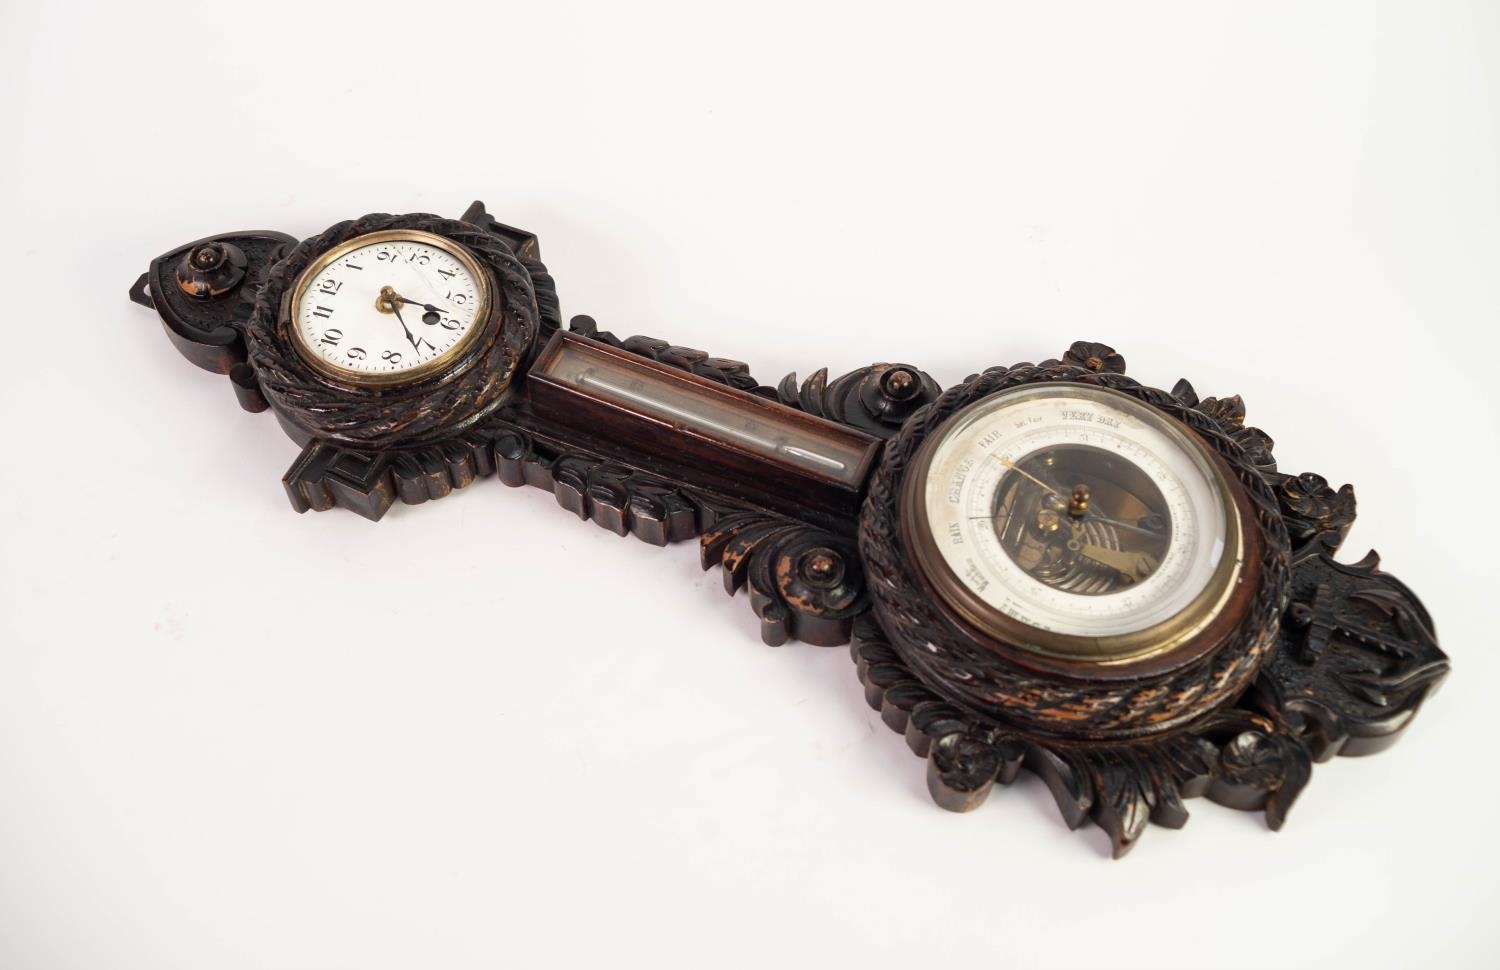 CIRCA 1920s ANEROID (HOLOSTERIC) BAROMETER, THERMOMETER AND CLOCK, in carvedoak maritime flavour - Image 2 of 2